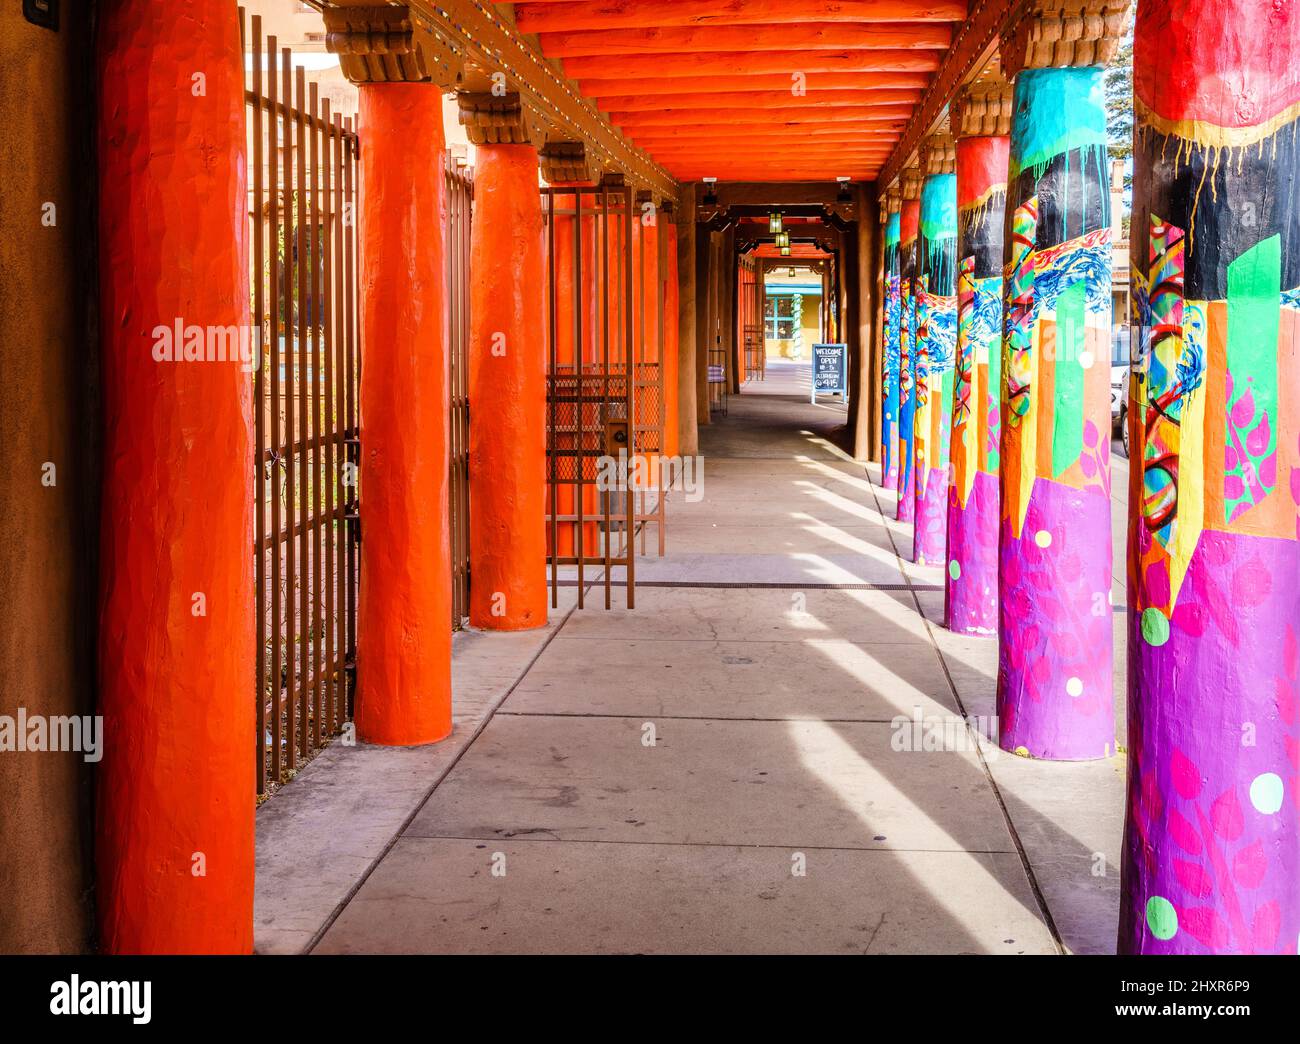 Brightly painted colonnade in central plaza in Santa Fe, New Mexico Stock Photo